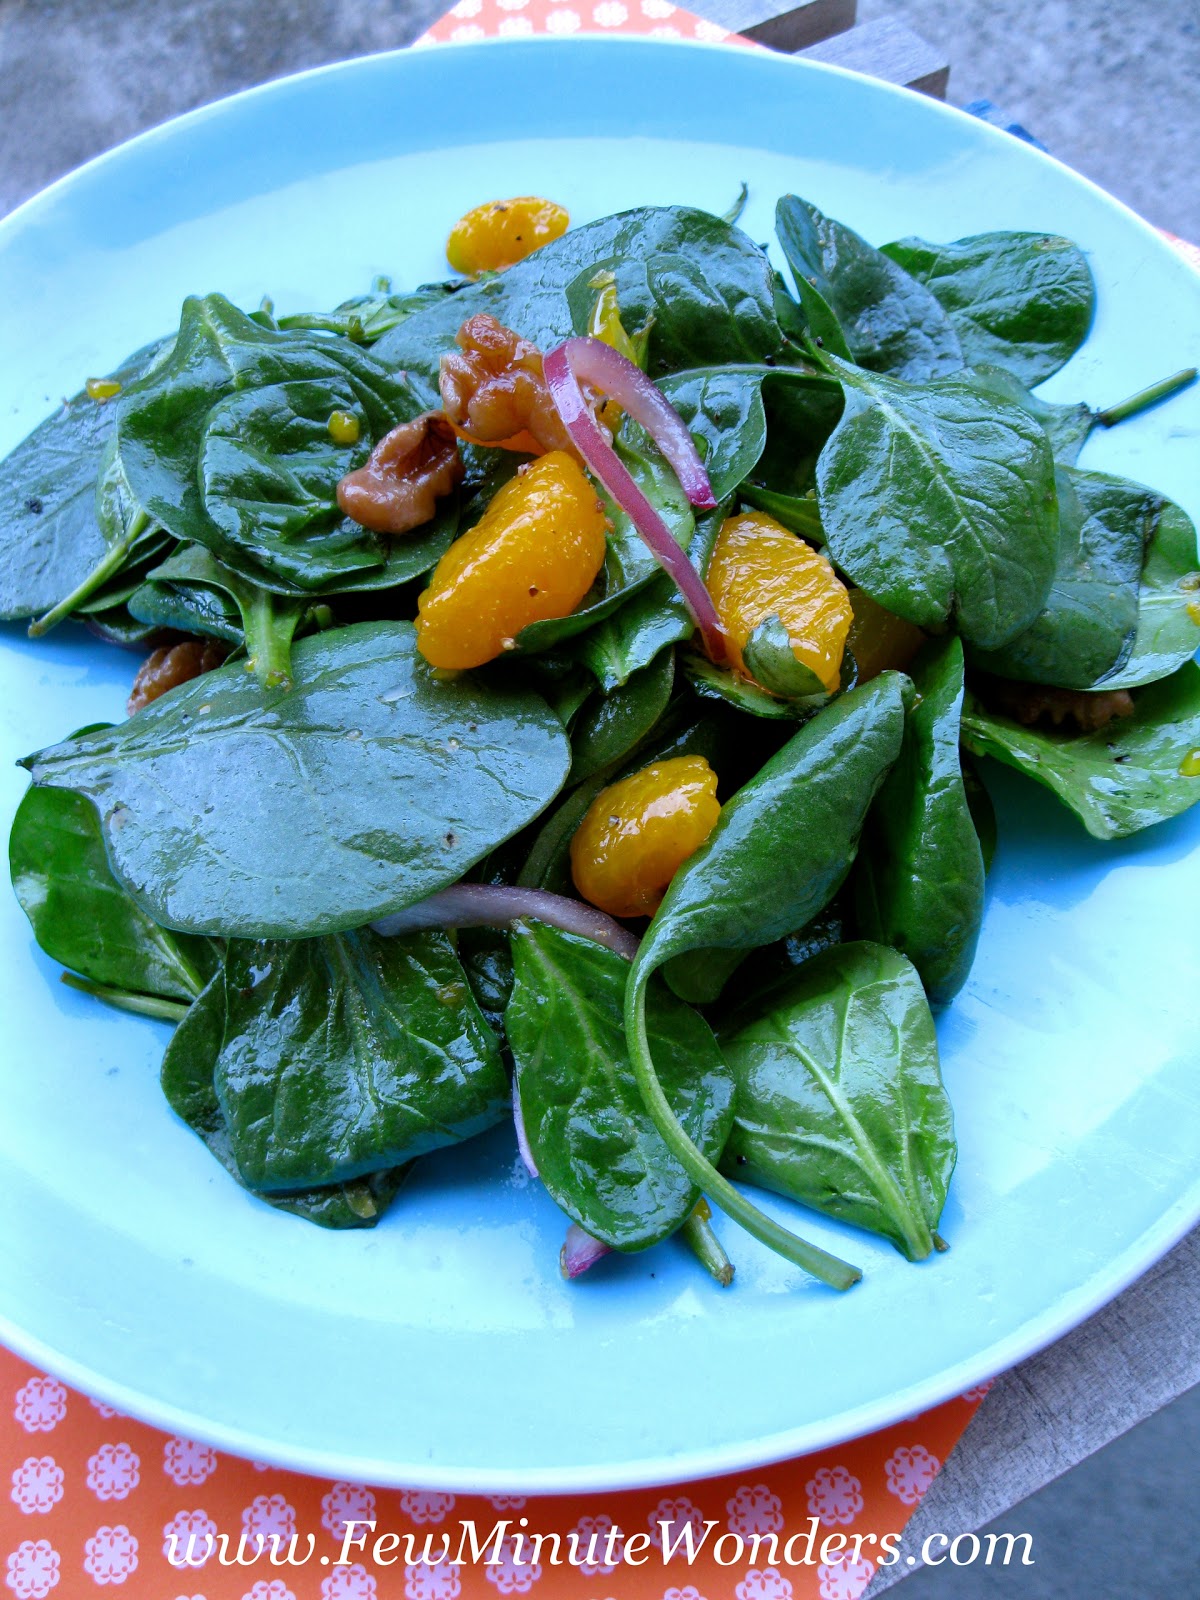 Spinach Salad With Mandarin Oranges - My Family Thyme